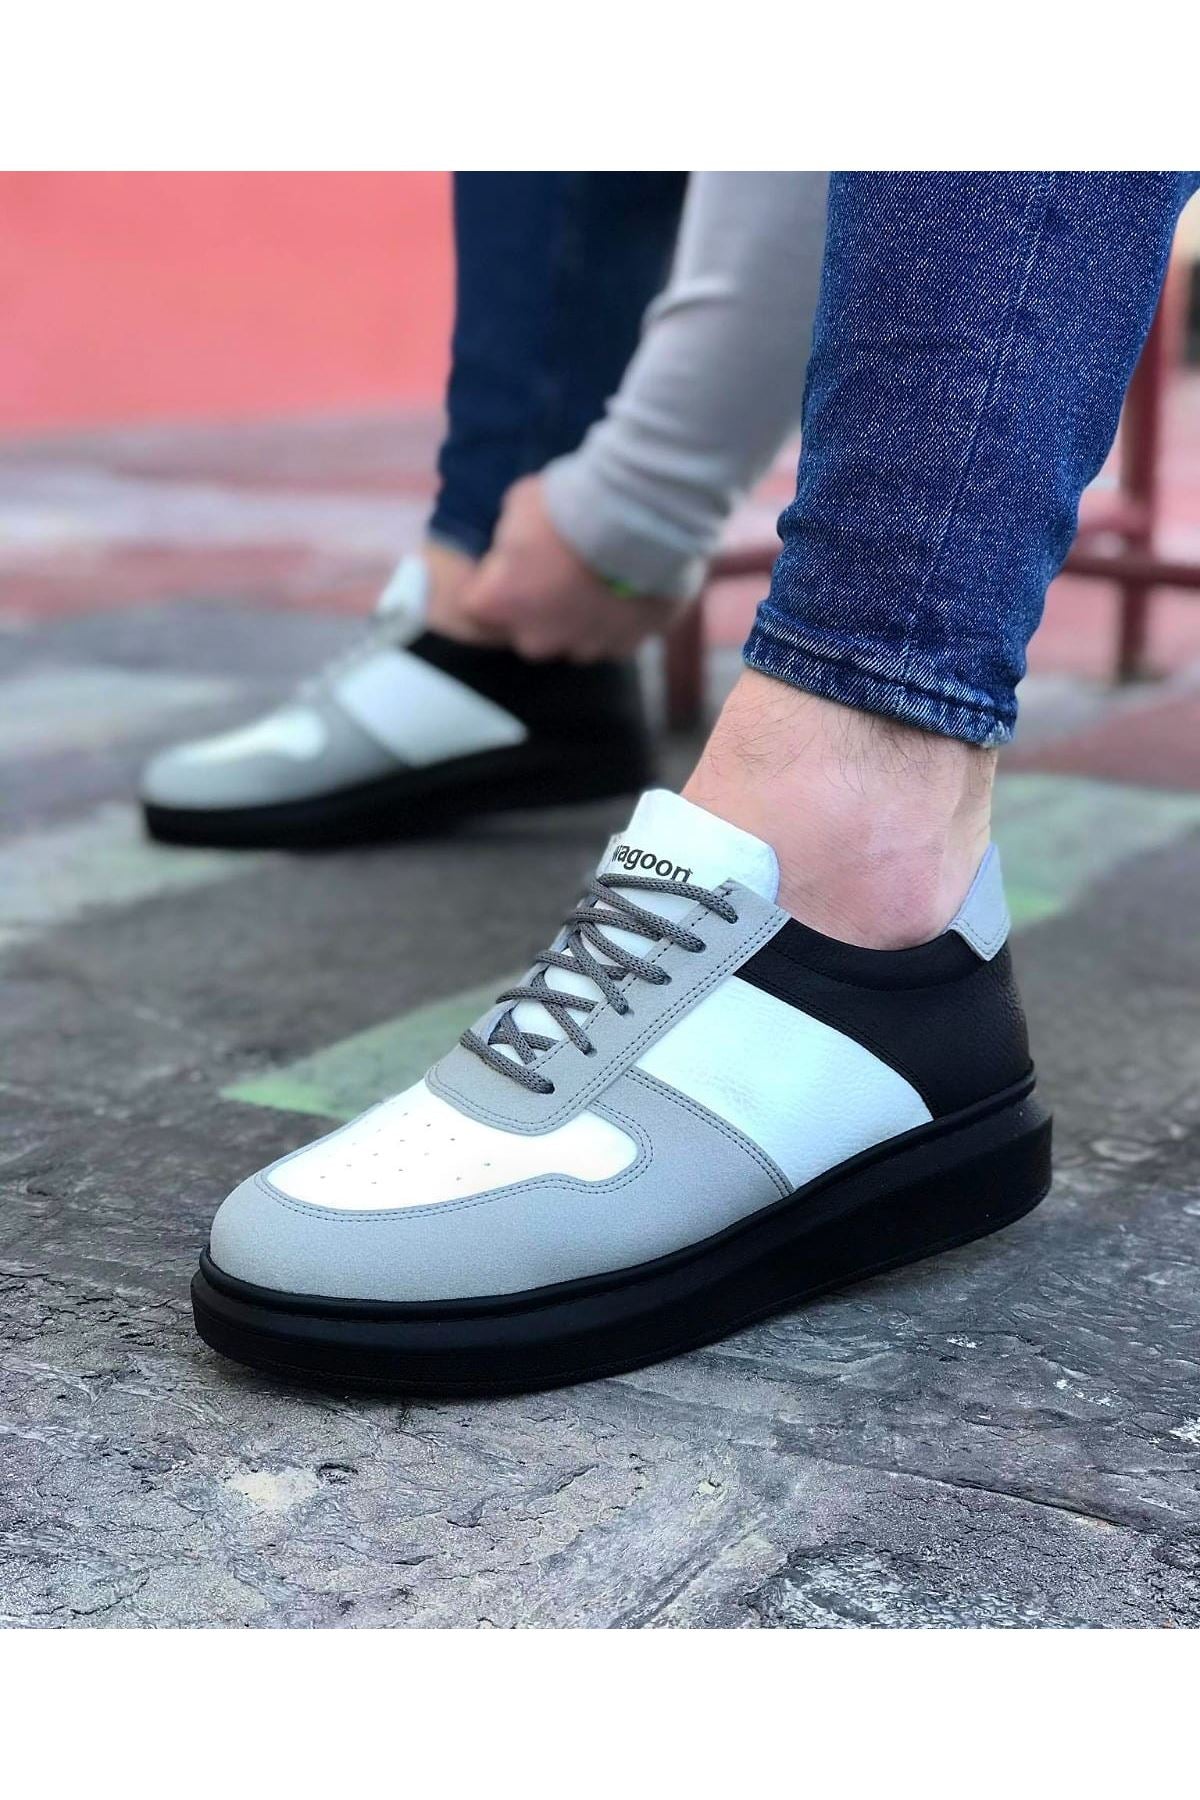 WG011 White Charcoal Men's Casual Shoes - STREETMODE™